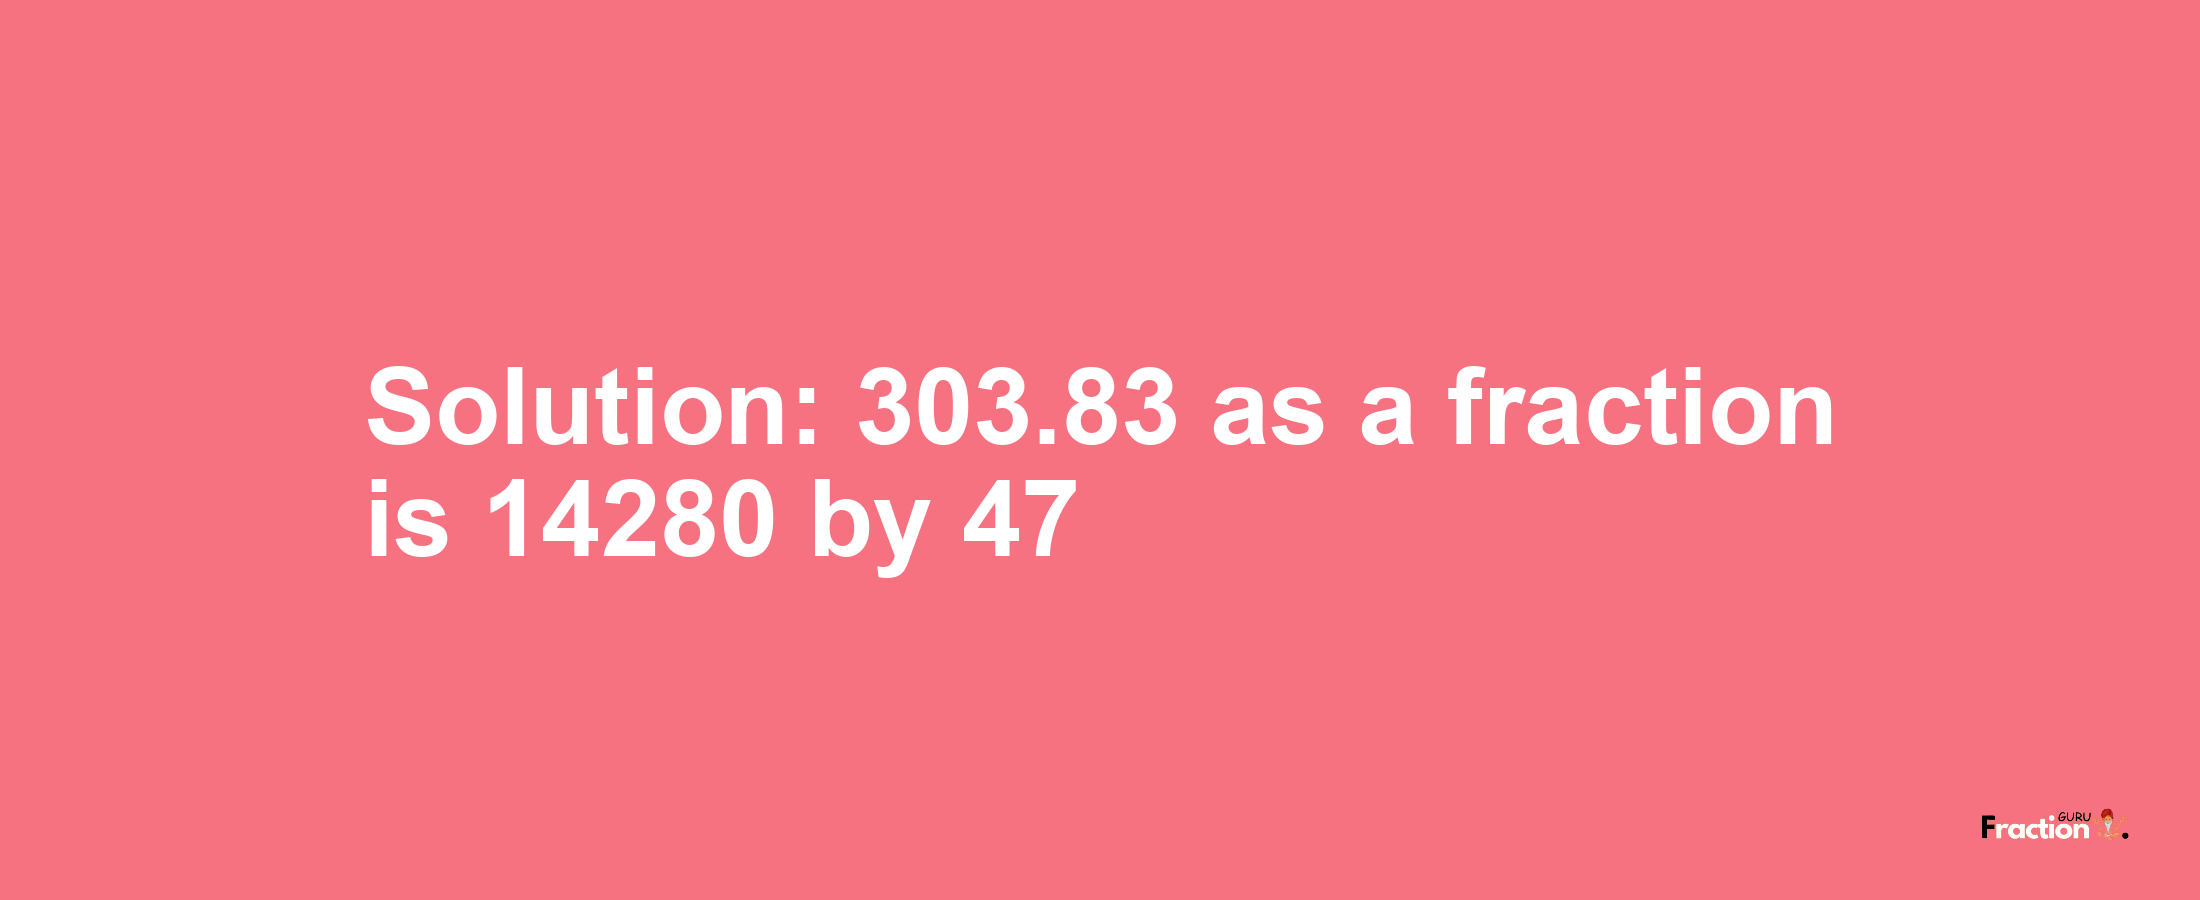 Solution:303.83 as a fraction is 14280/47